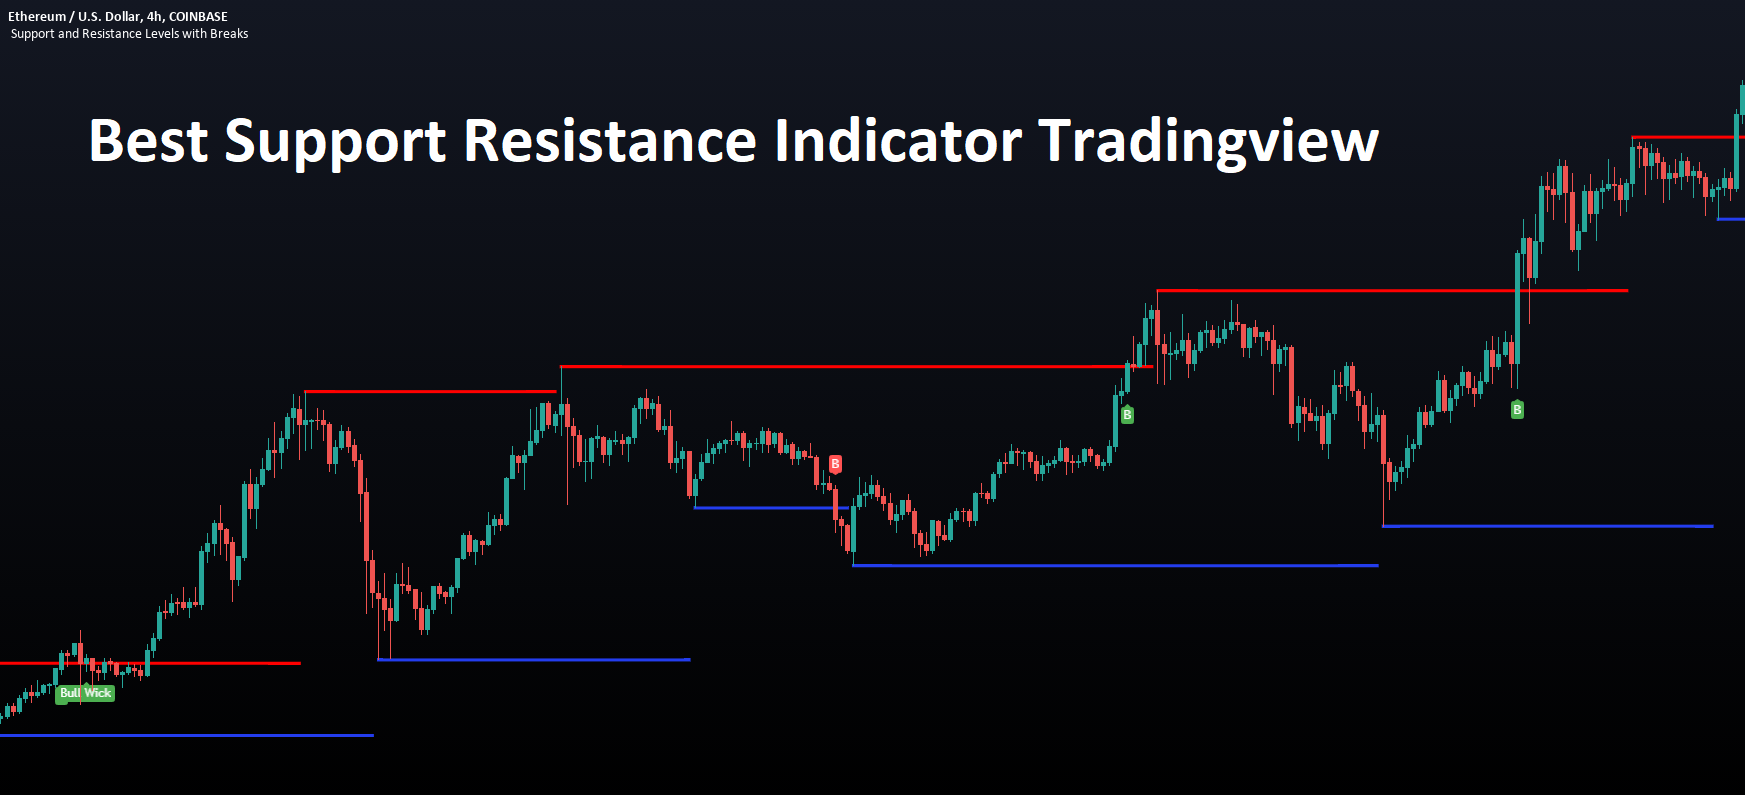 Best Support Resistance Indicator Tradingview